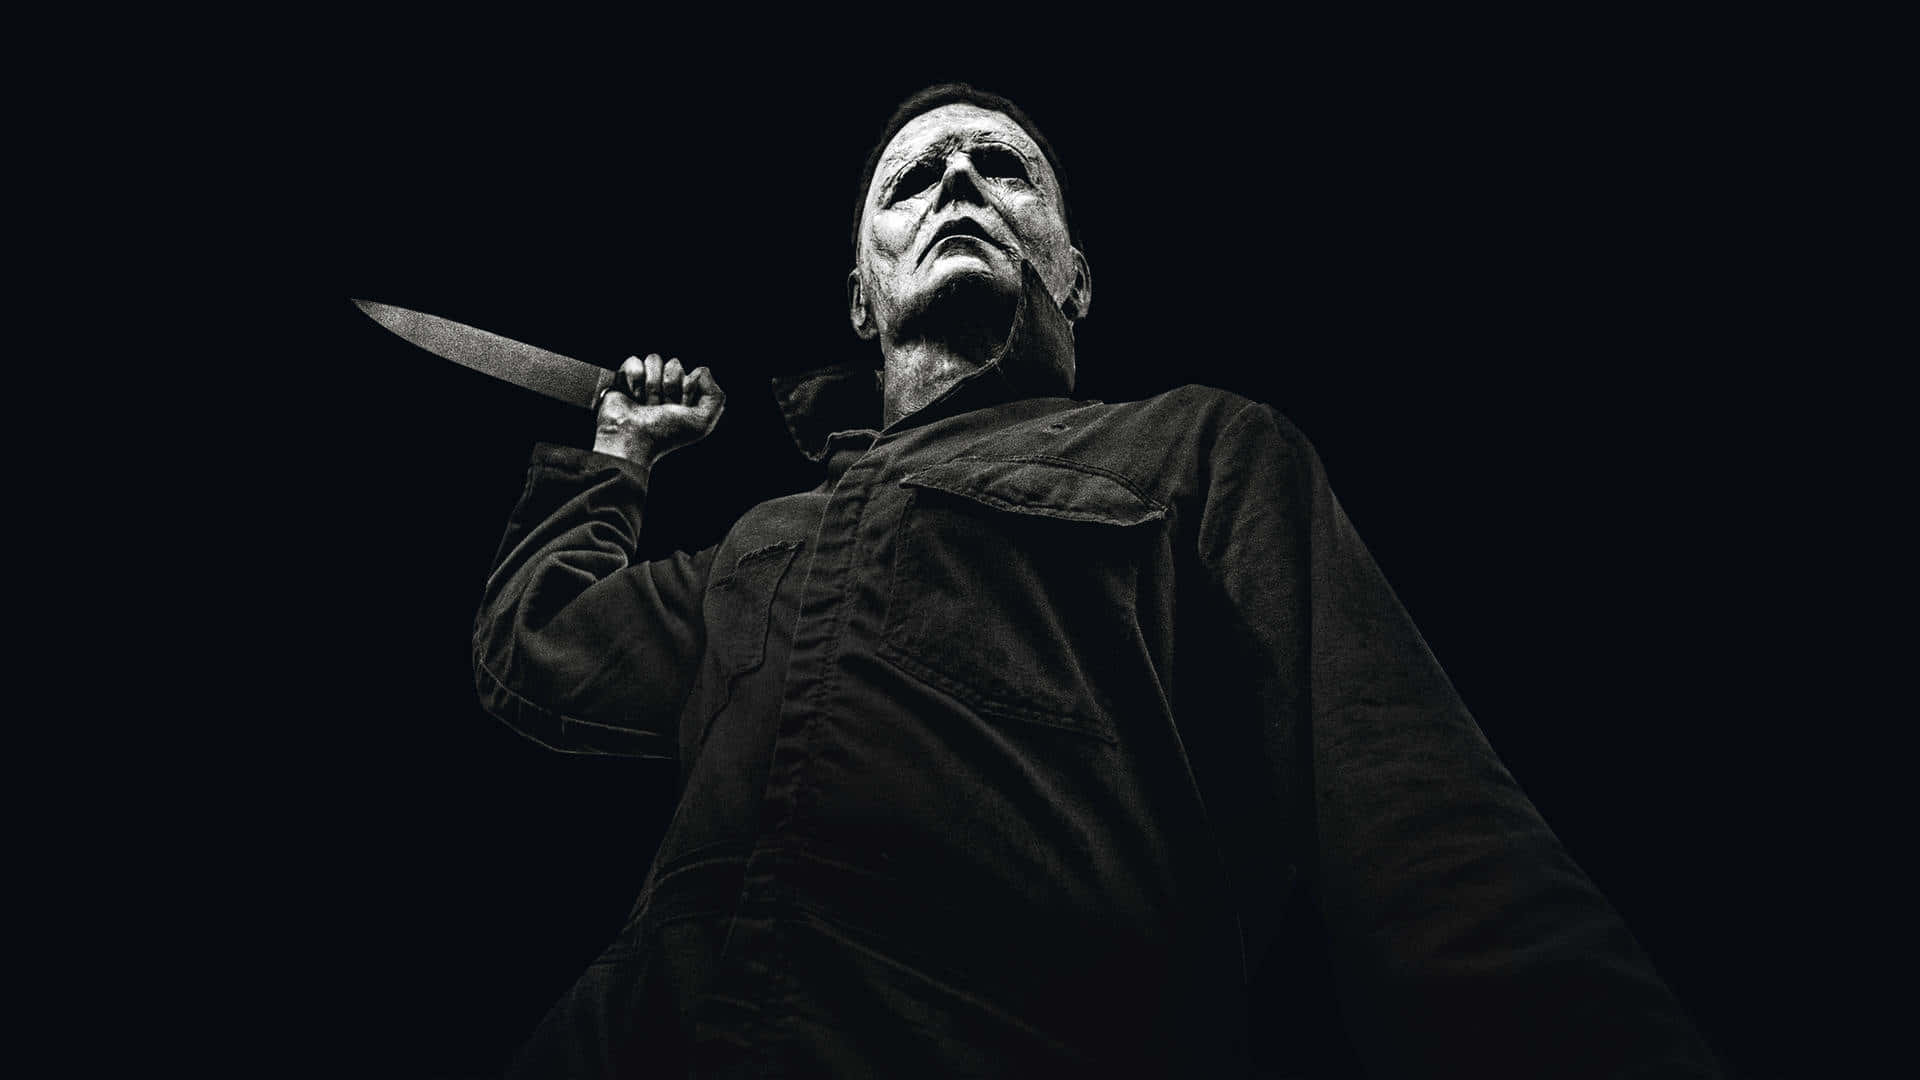 Menacing Michael Myers emerges from the darkness